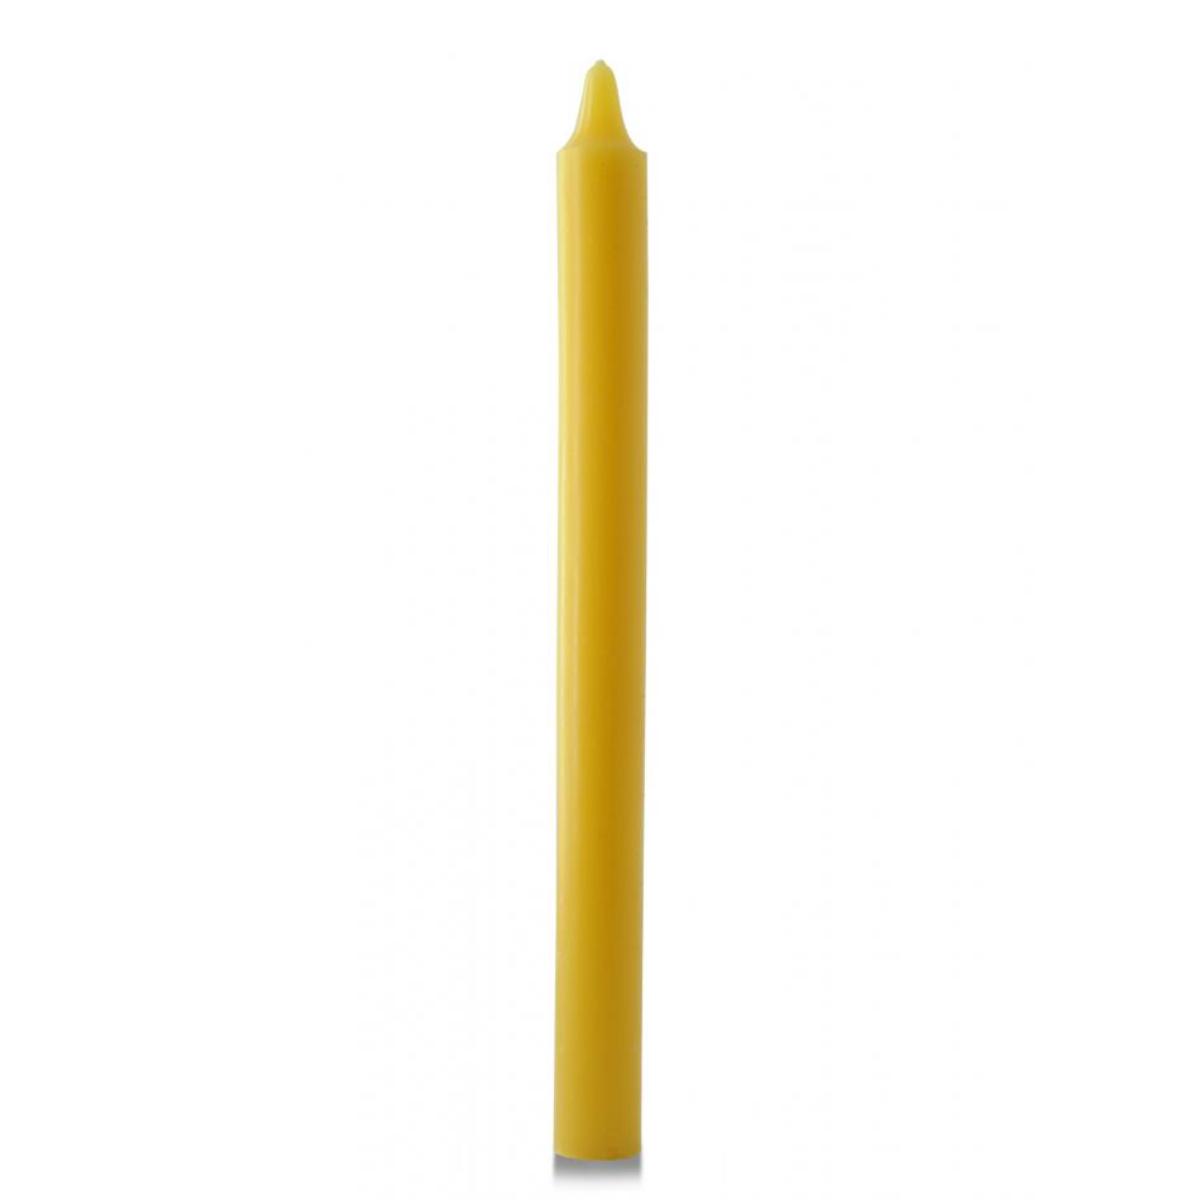 Requiem Candles 25% Unbleached Beeswax Candles Available In a Range of Diameters and Lengths